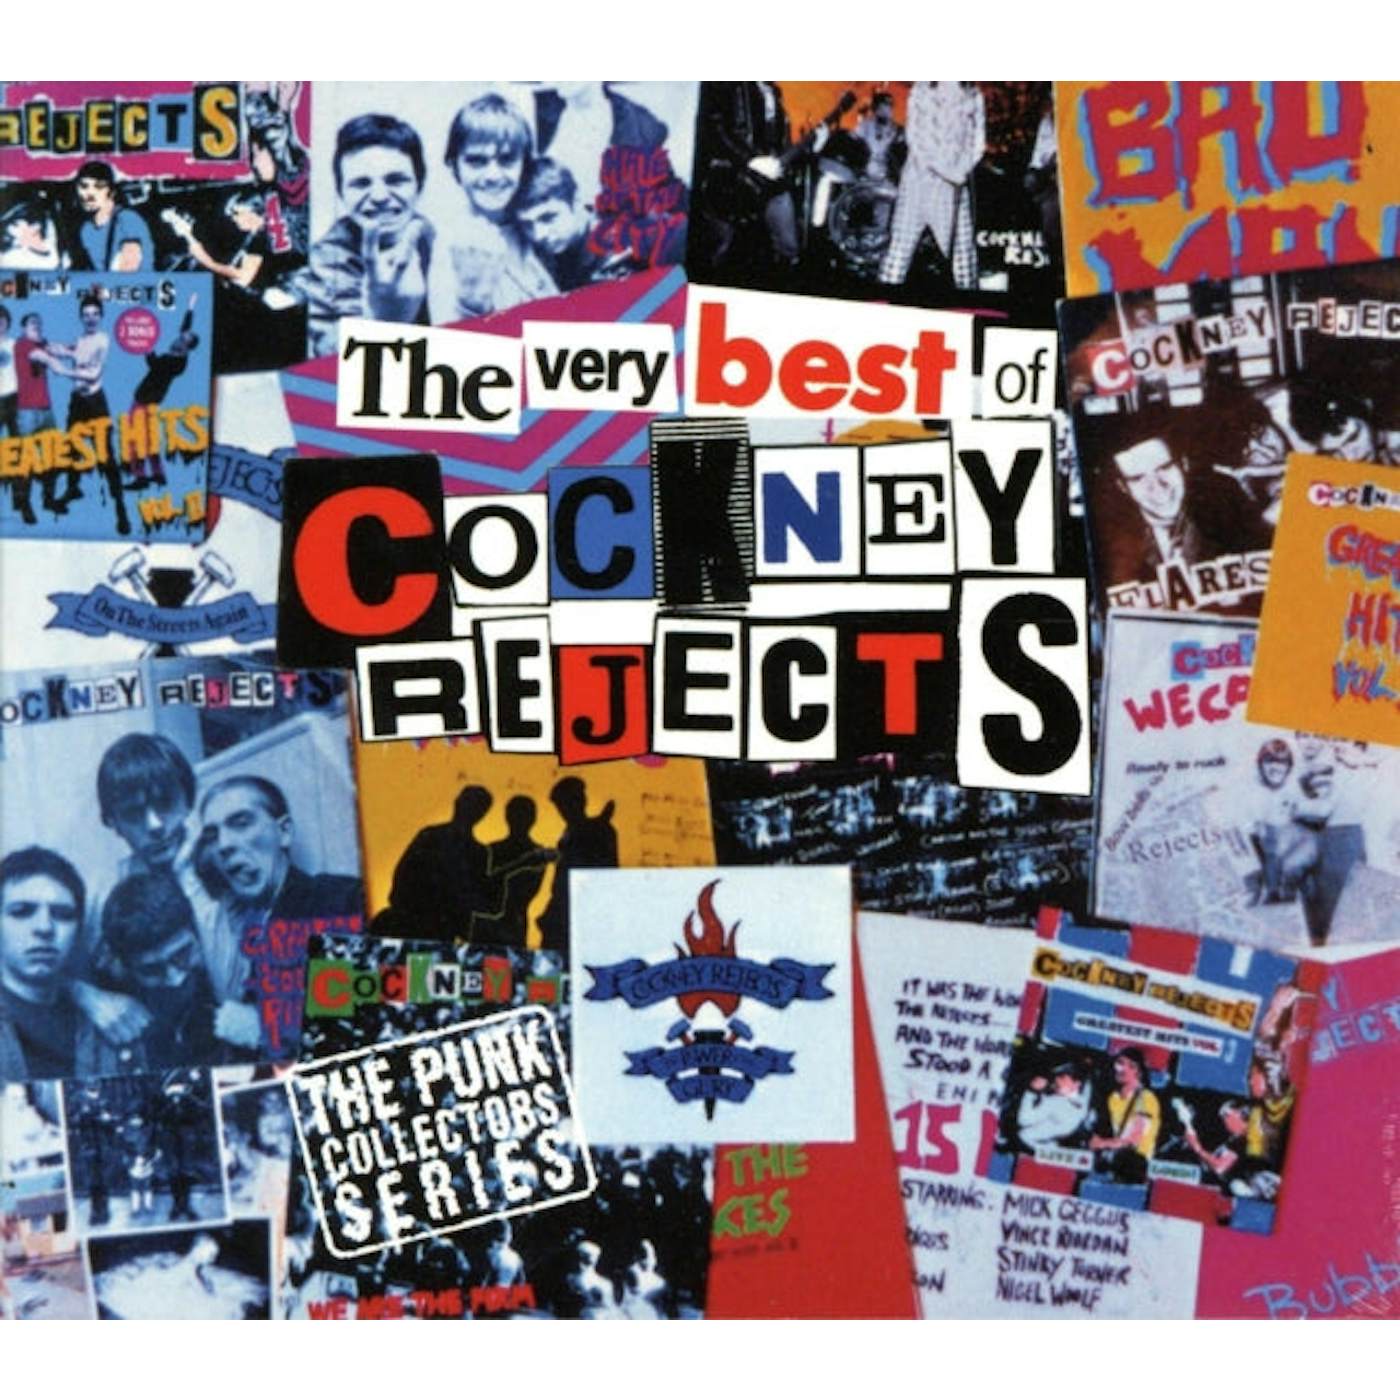 Cockney Rejects CD - Very Best Of